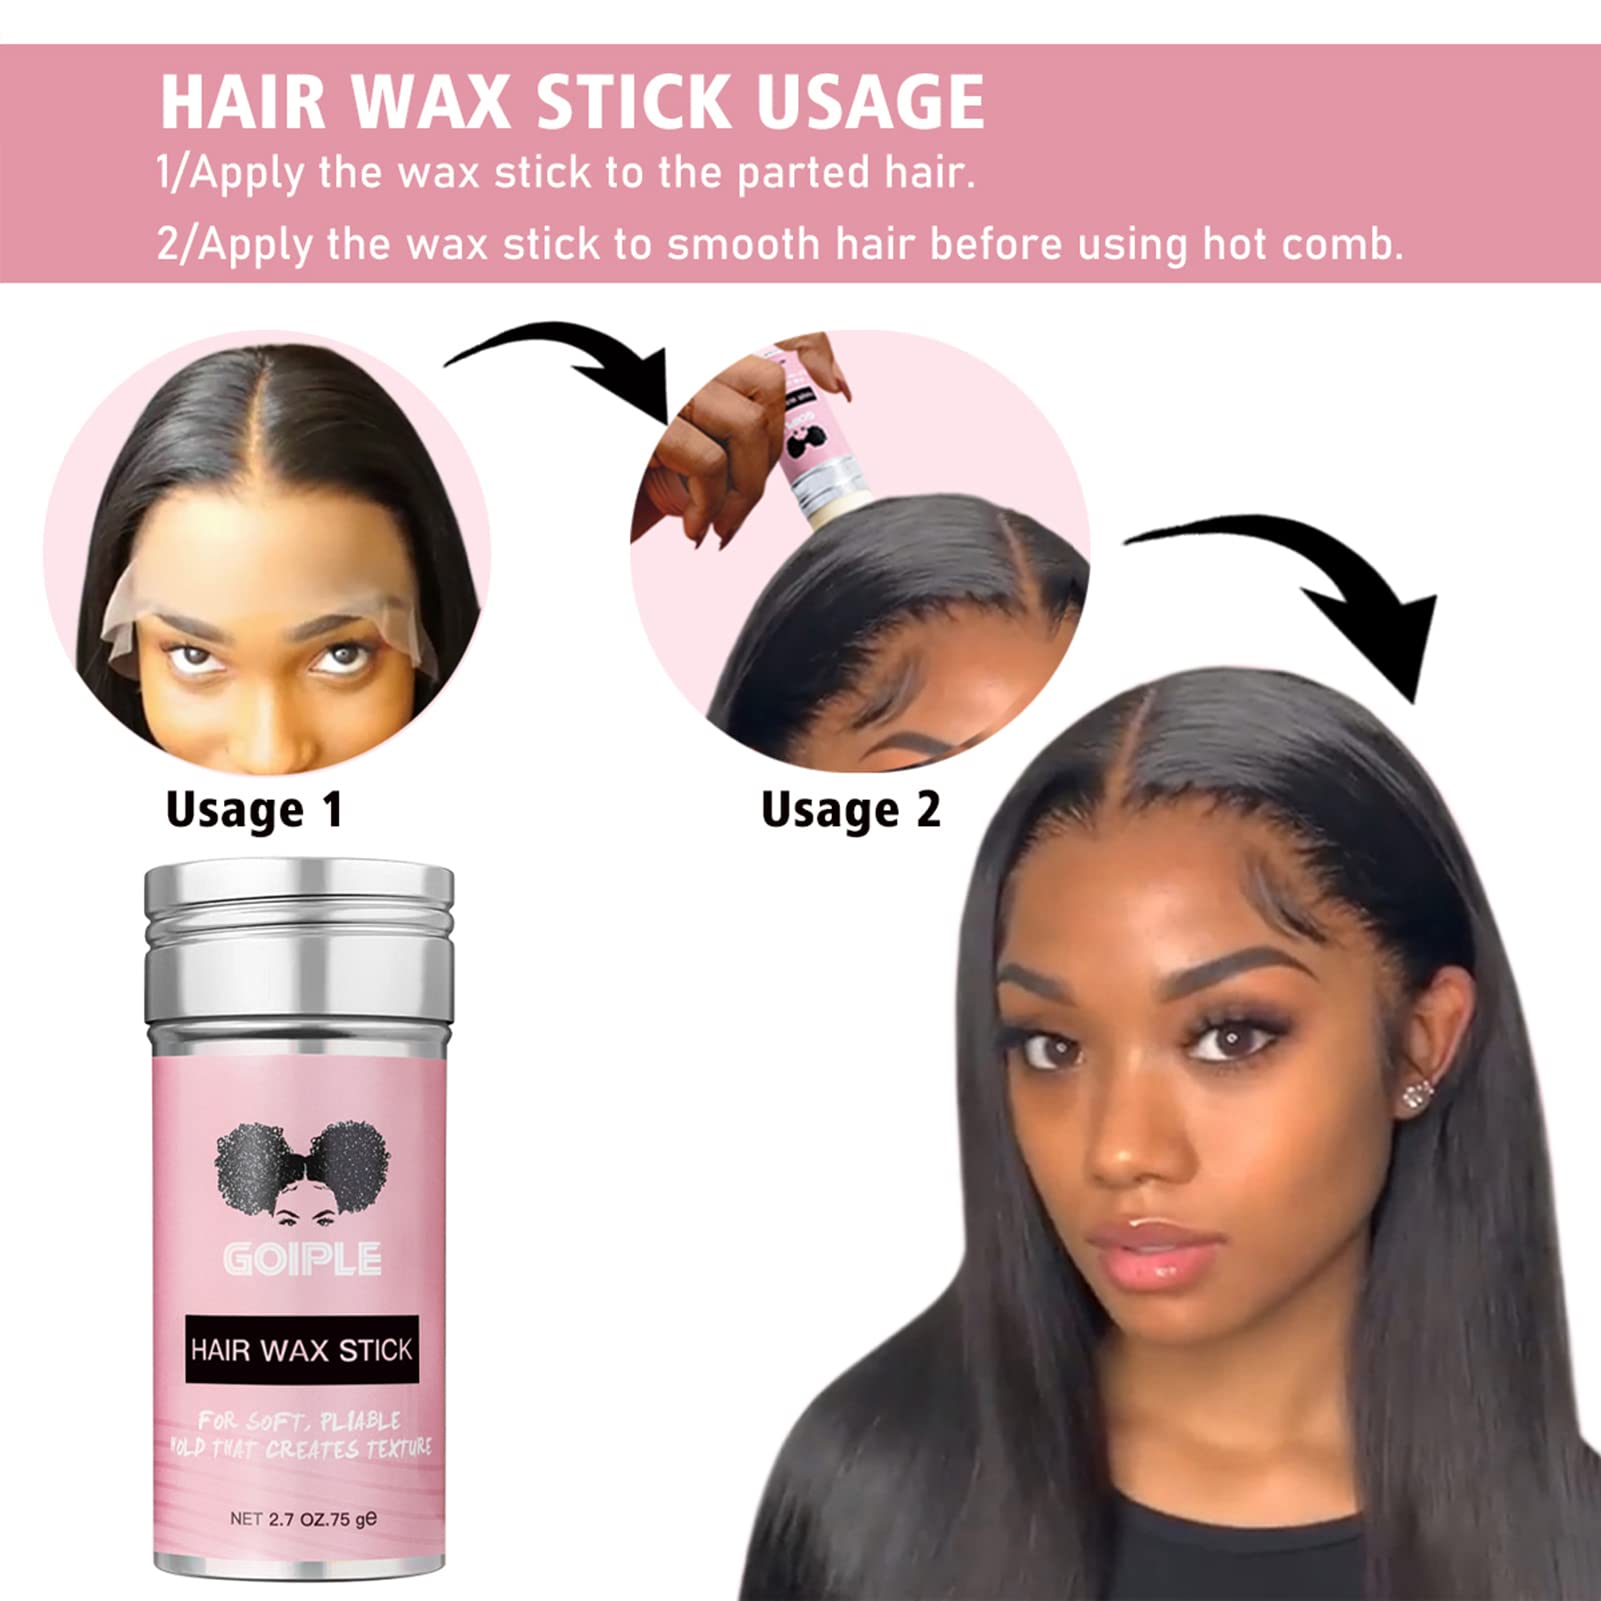 Wig Kit for Lace Front Wigs